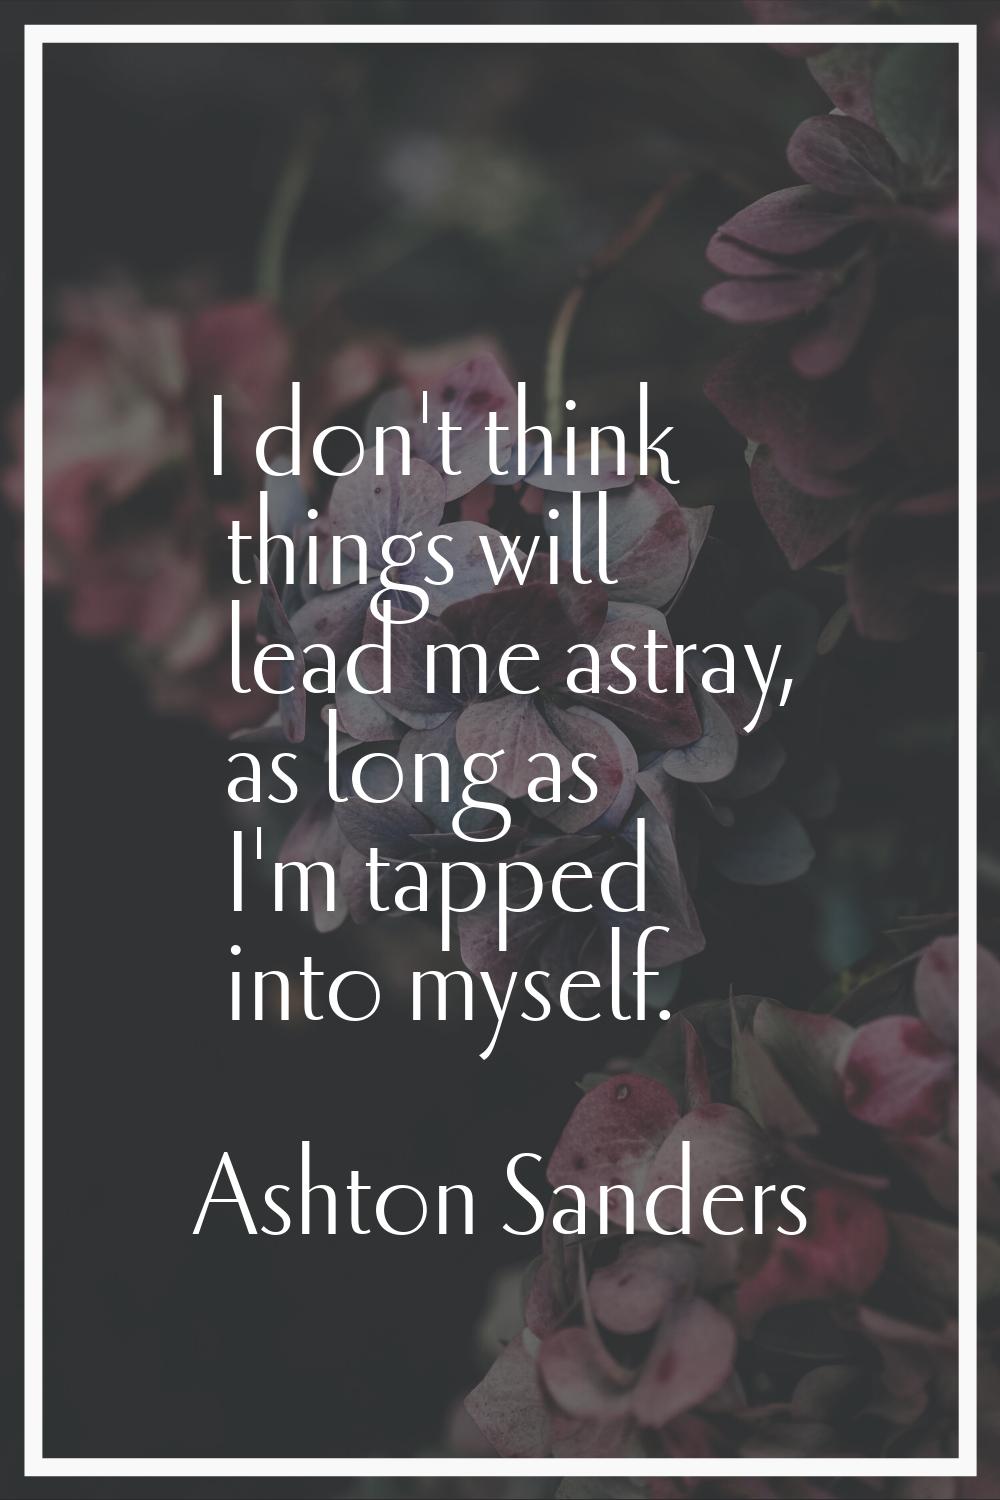 I don't think things will lead me astray, as long as I'm tapped into myself.